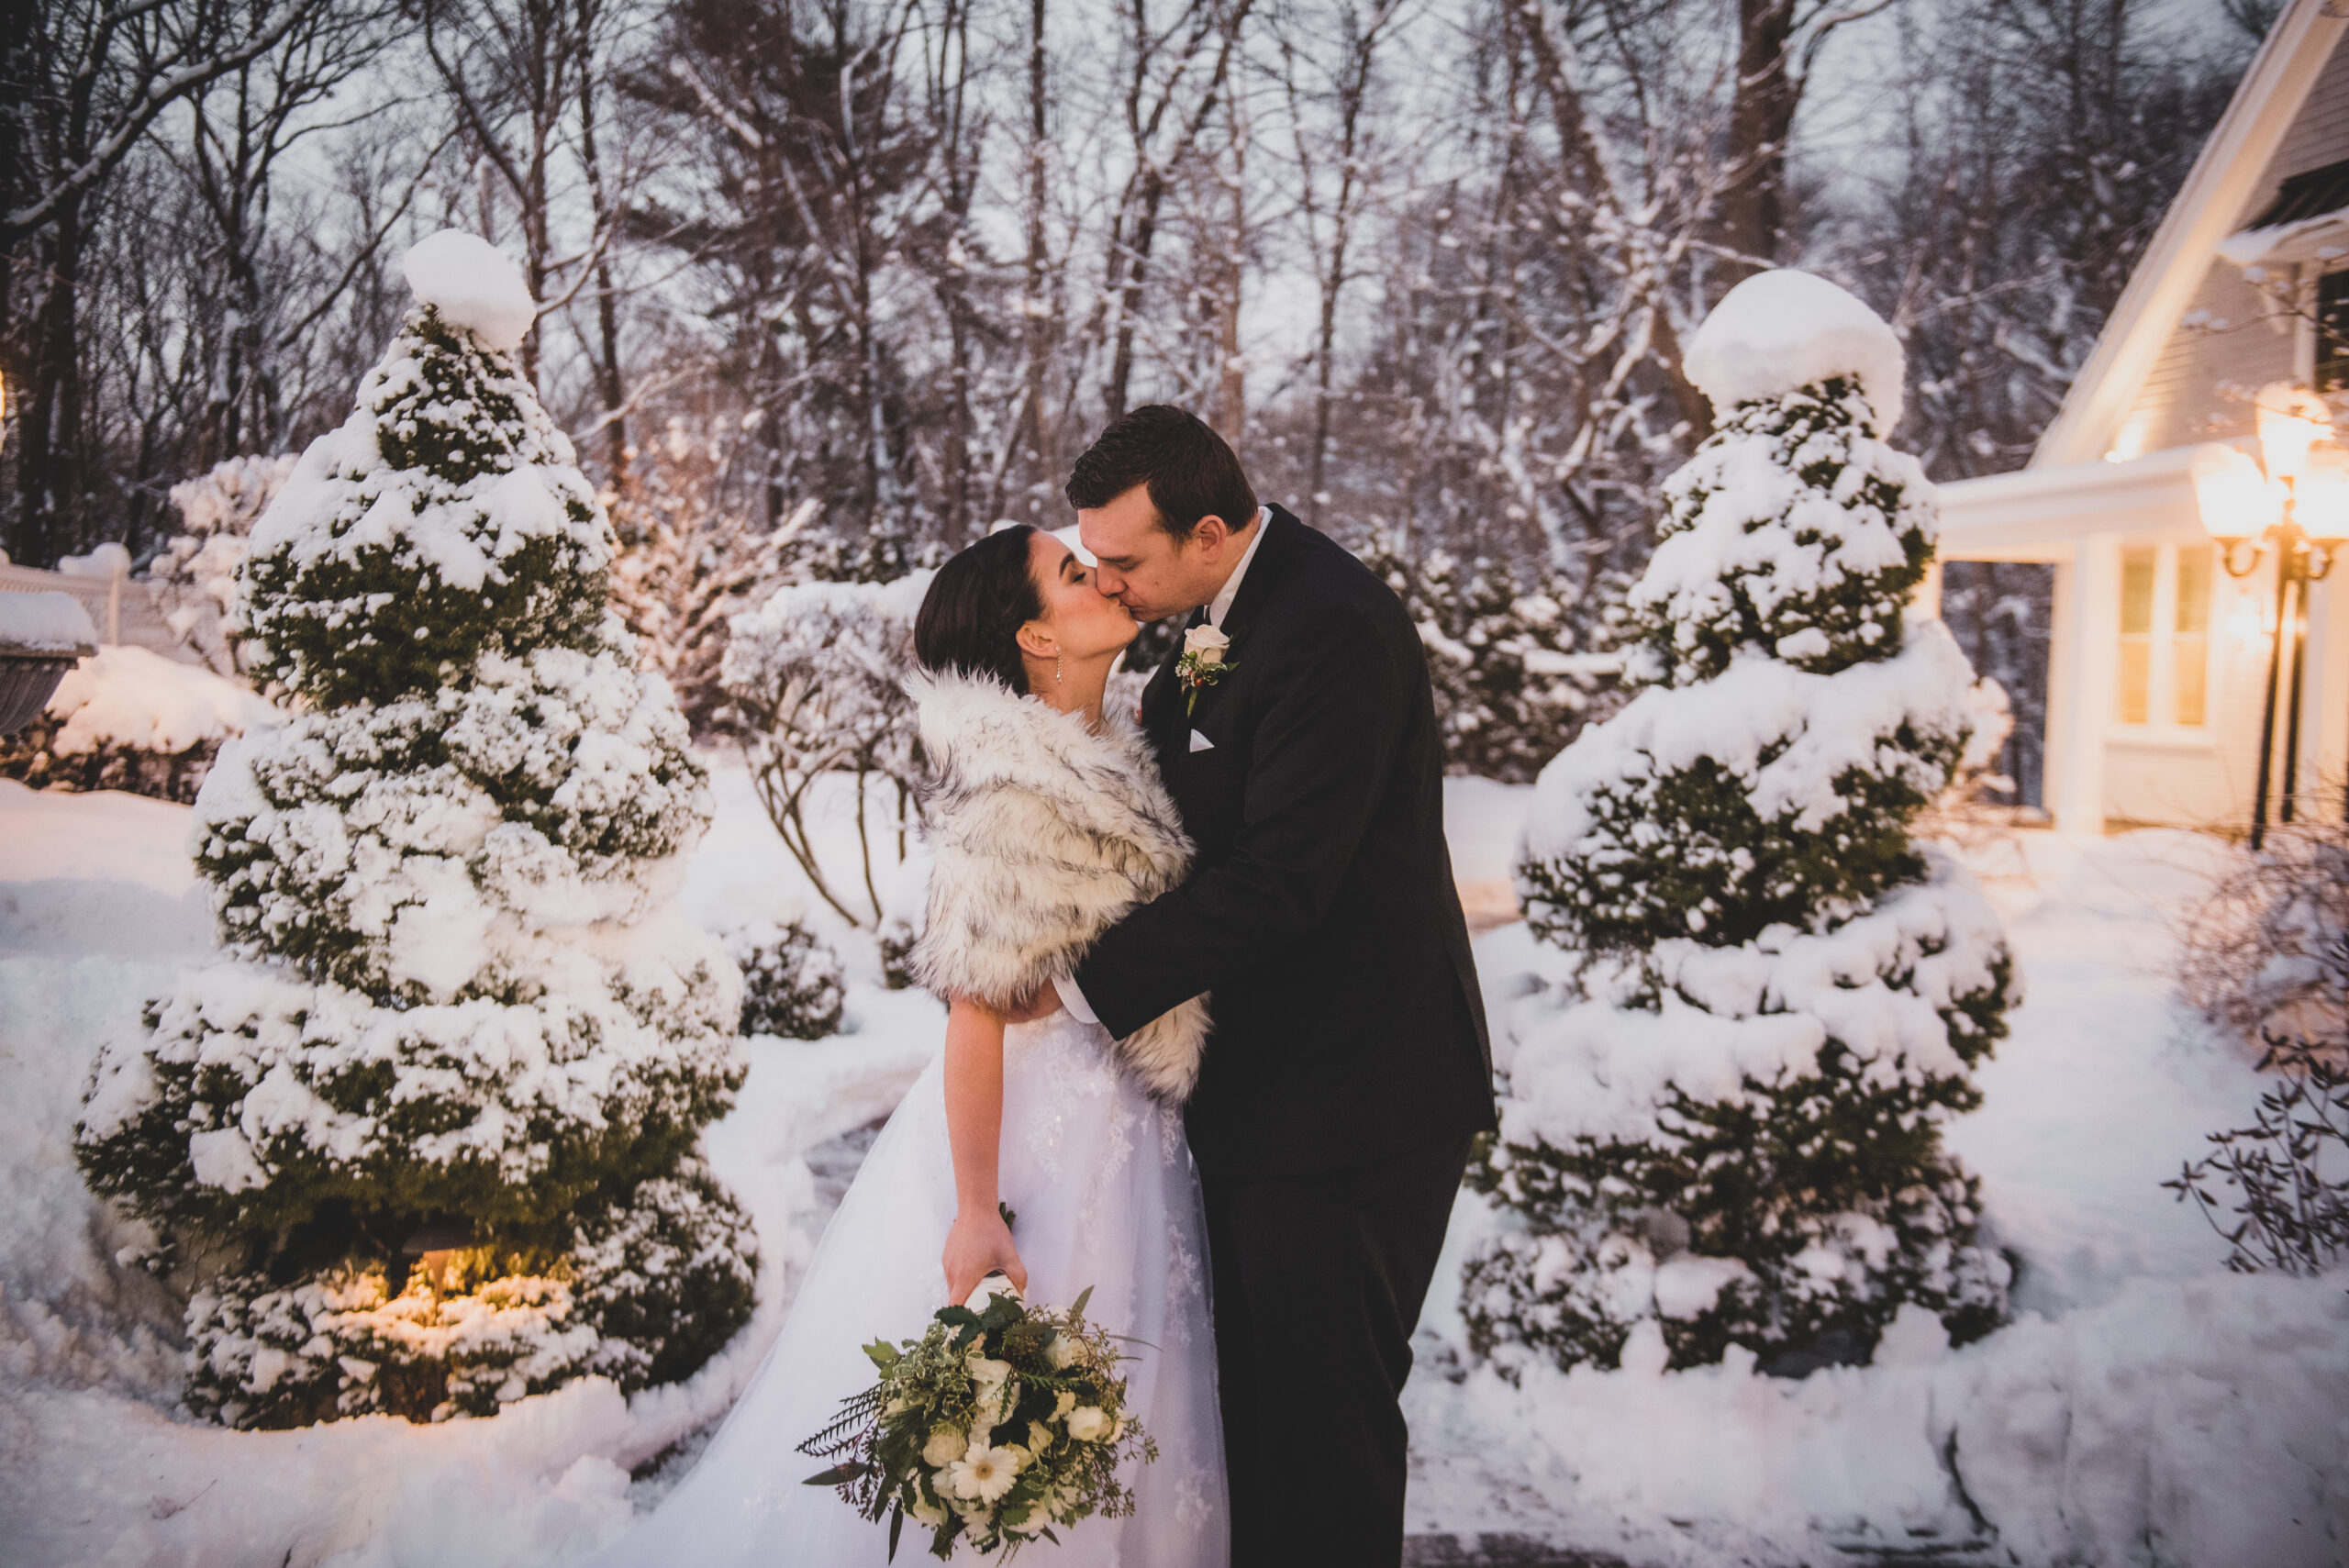 Bride and Groom Kissing at Their Winter Wedding in the Snow